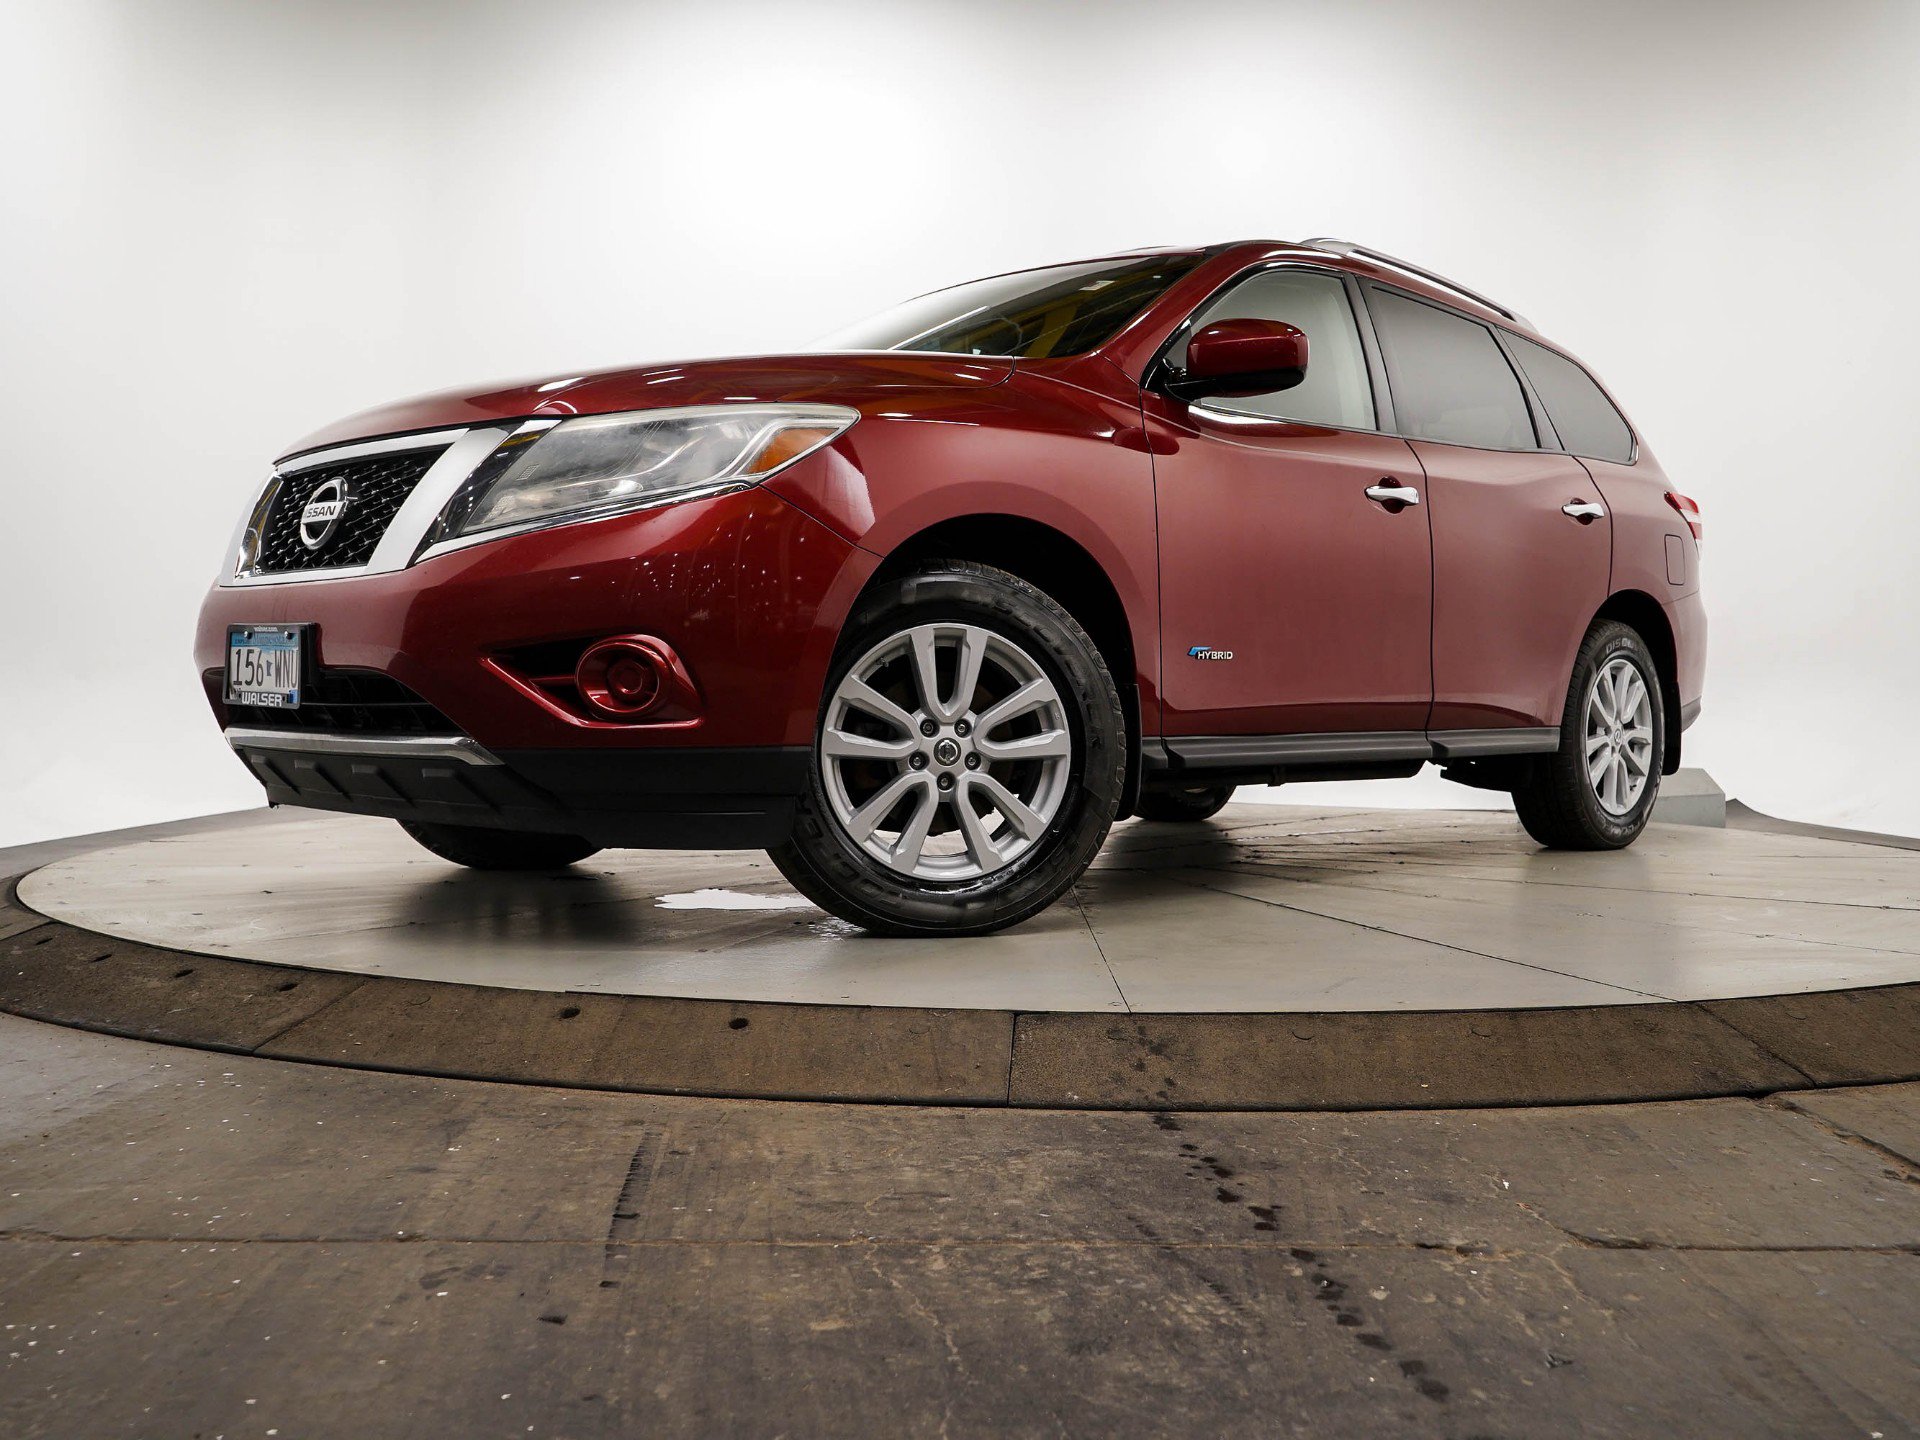 Used Nissan Pathfinder Hybrid for Sale Right Now - Autotrader